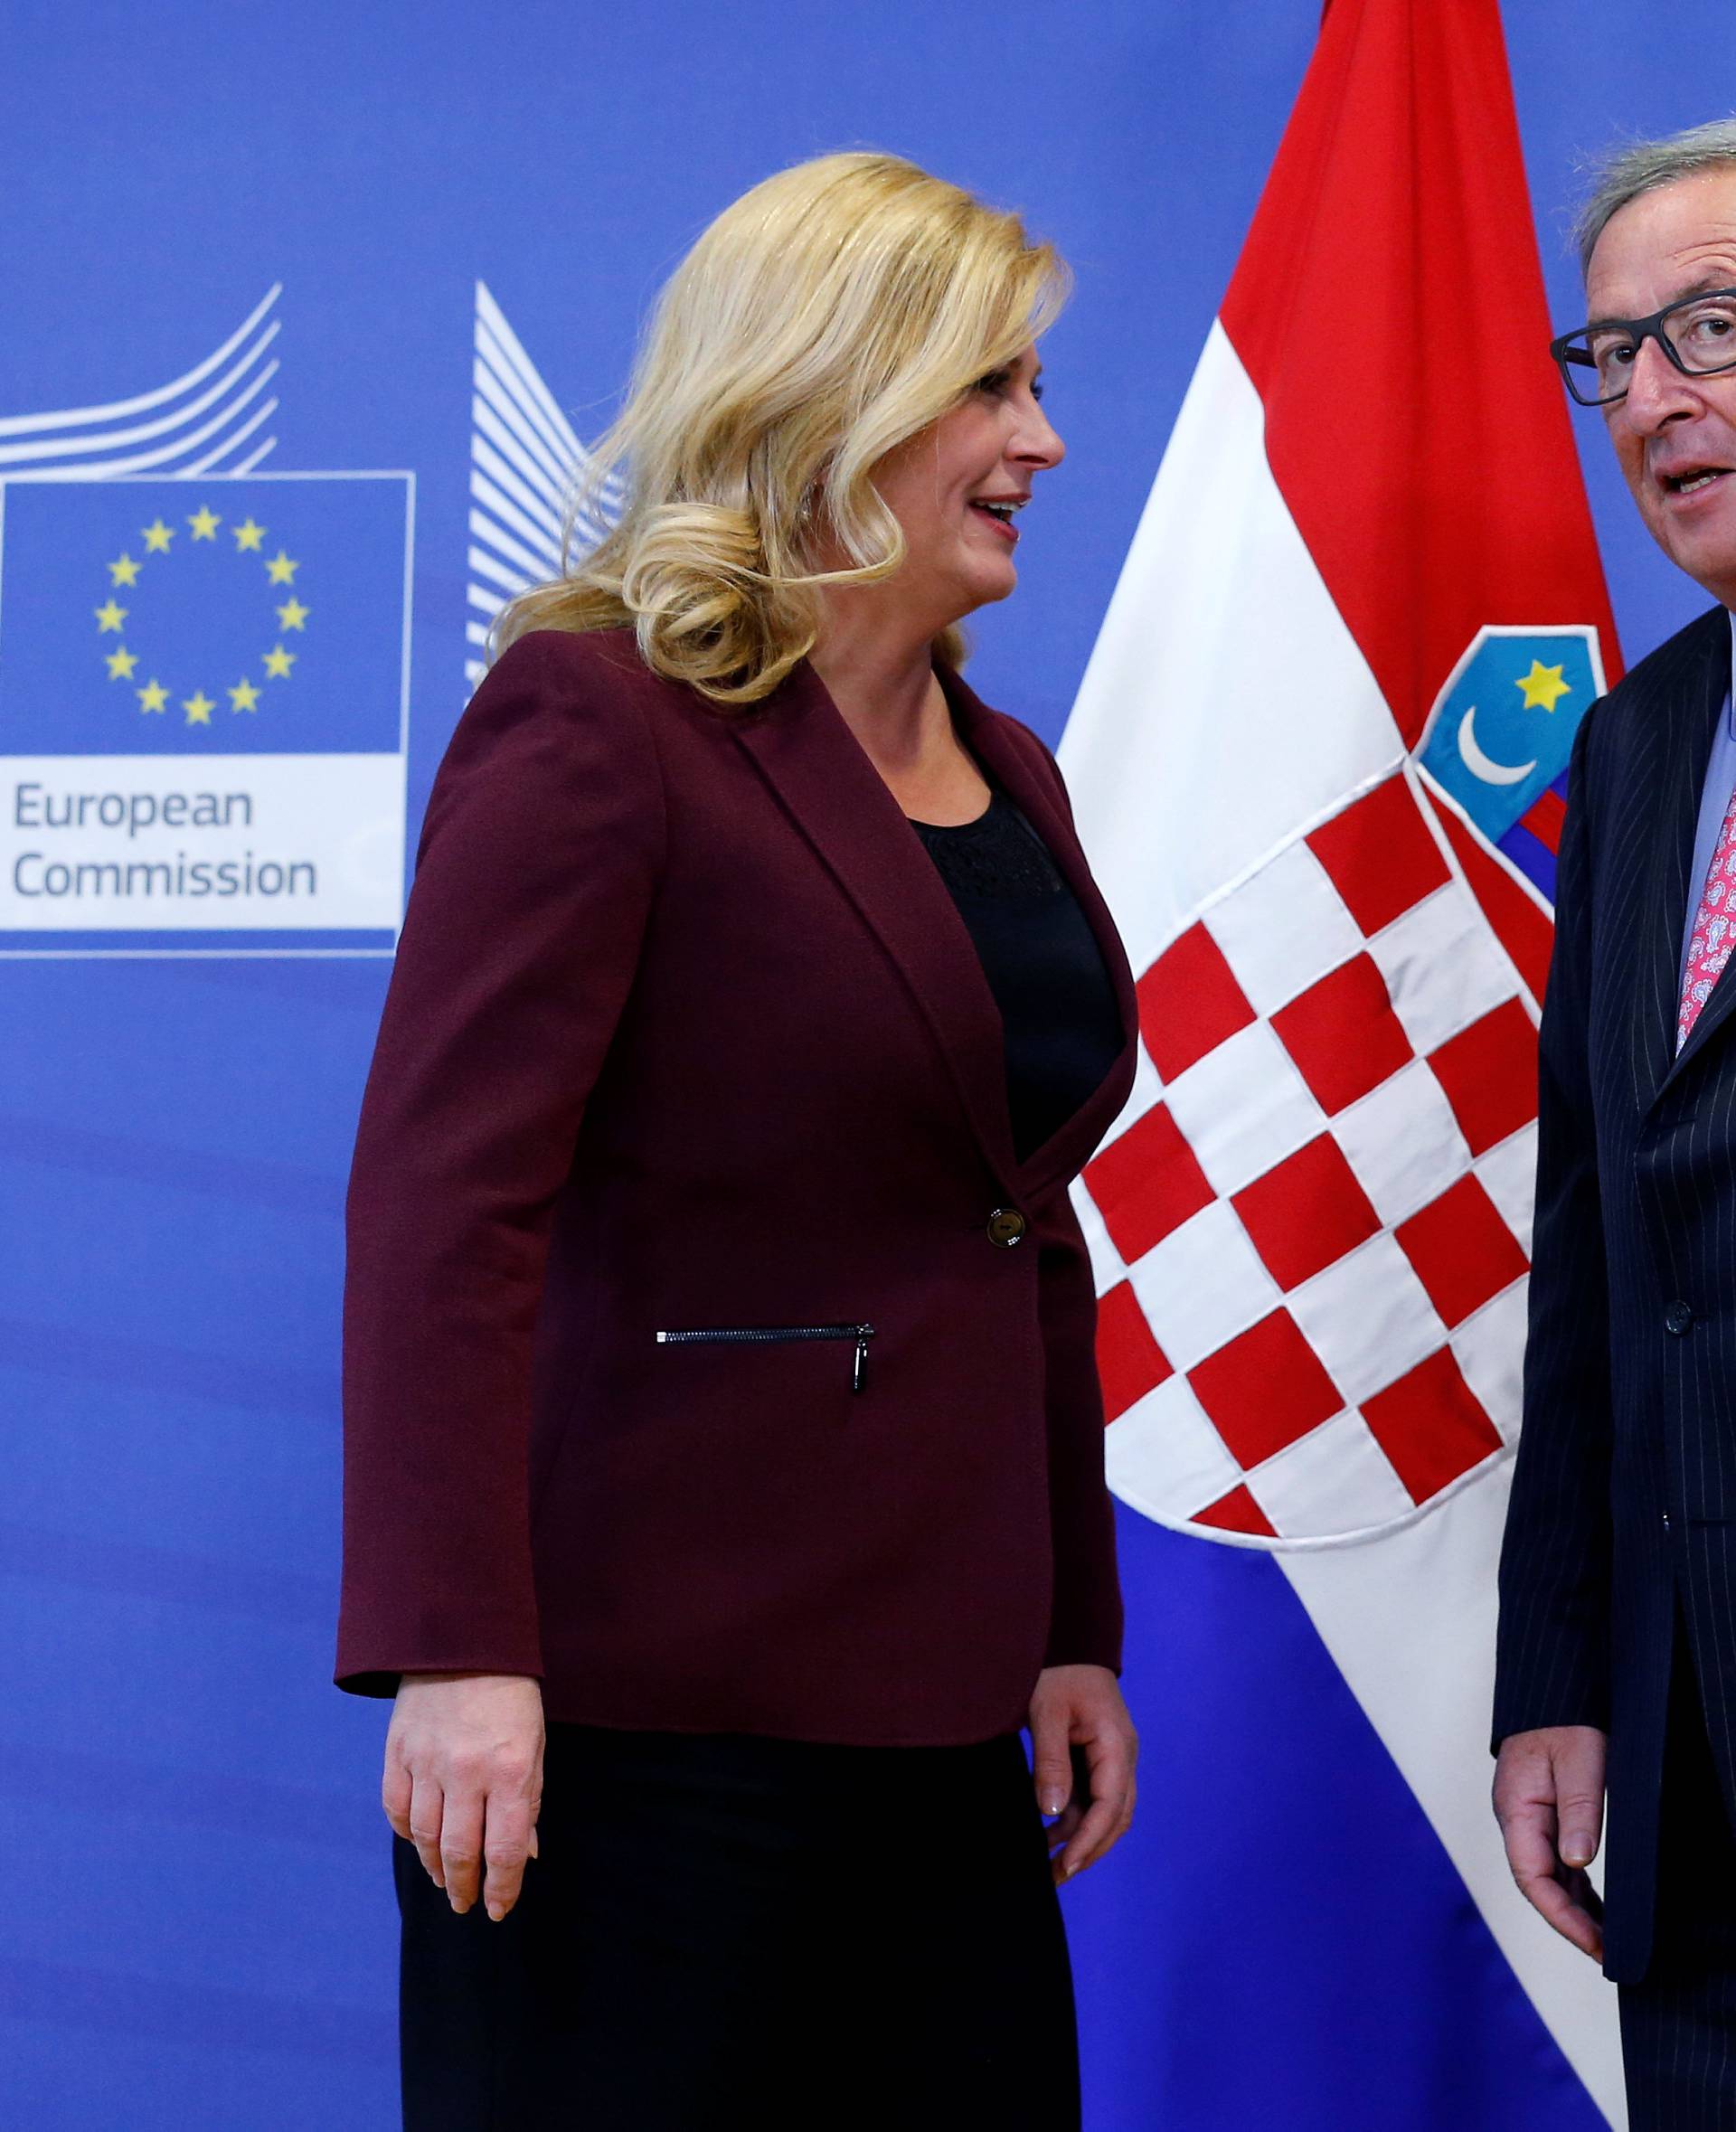 EU Commission President Juncker poses with Croatia's President Grabar-Kitarovic in Brussels